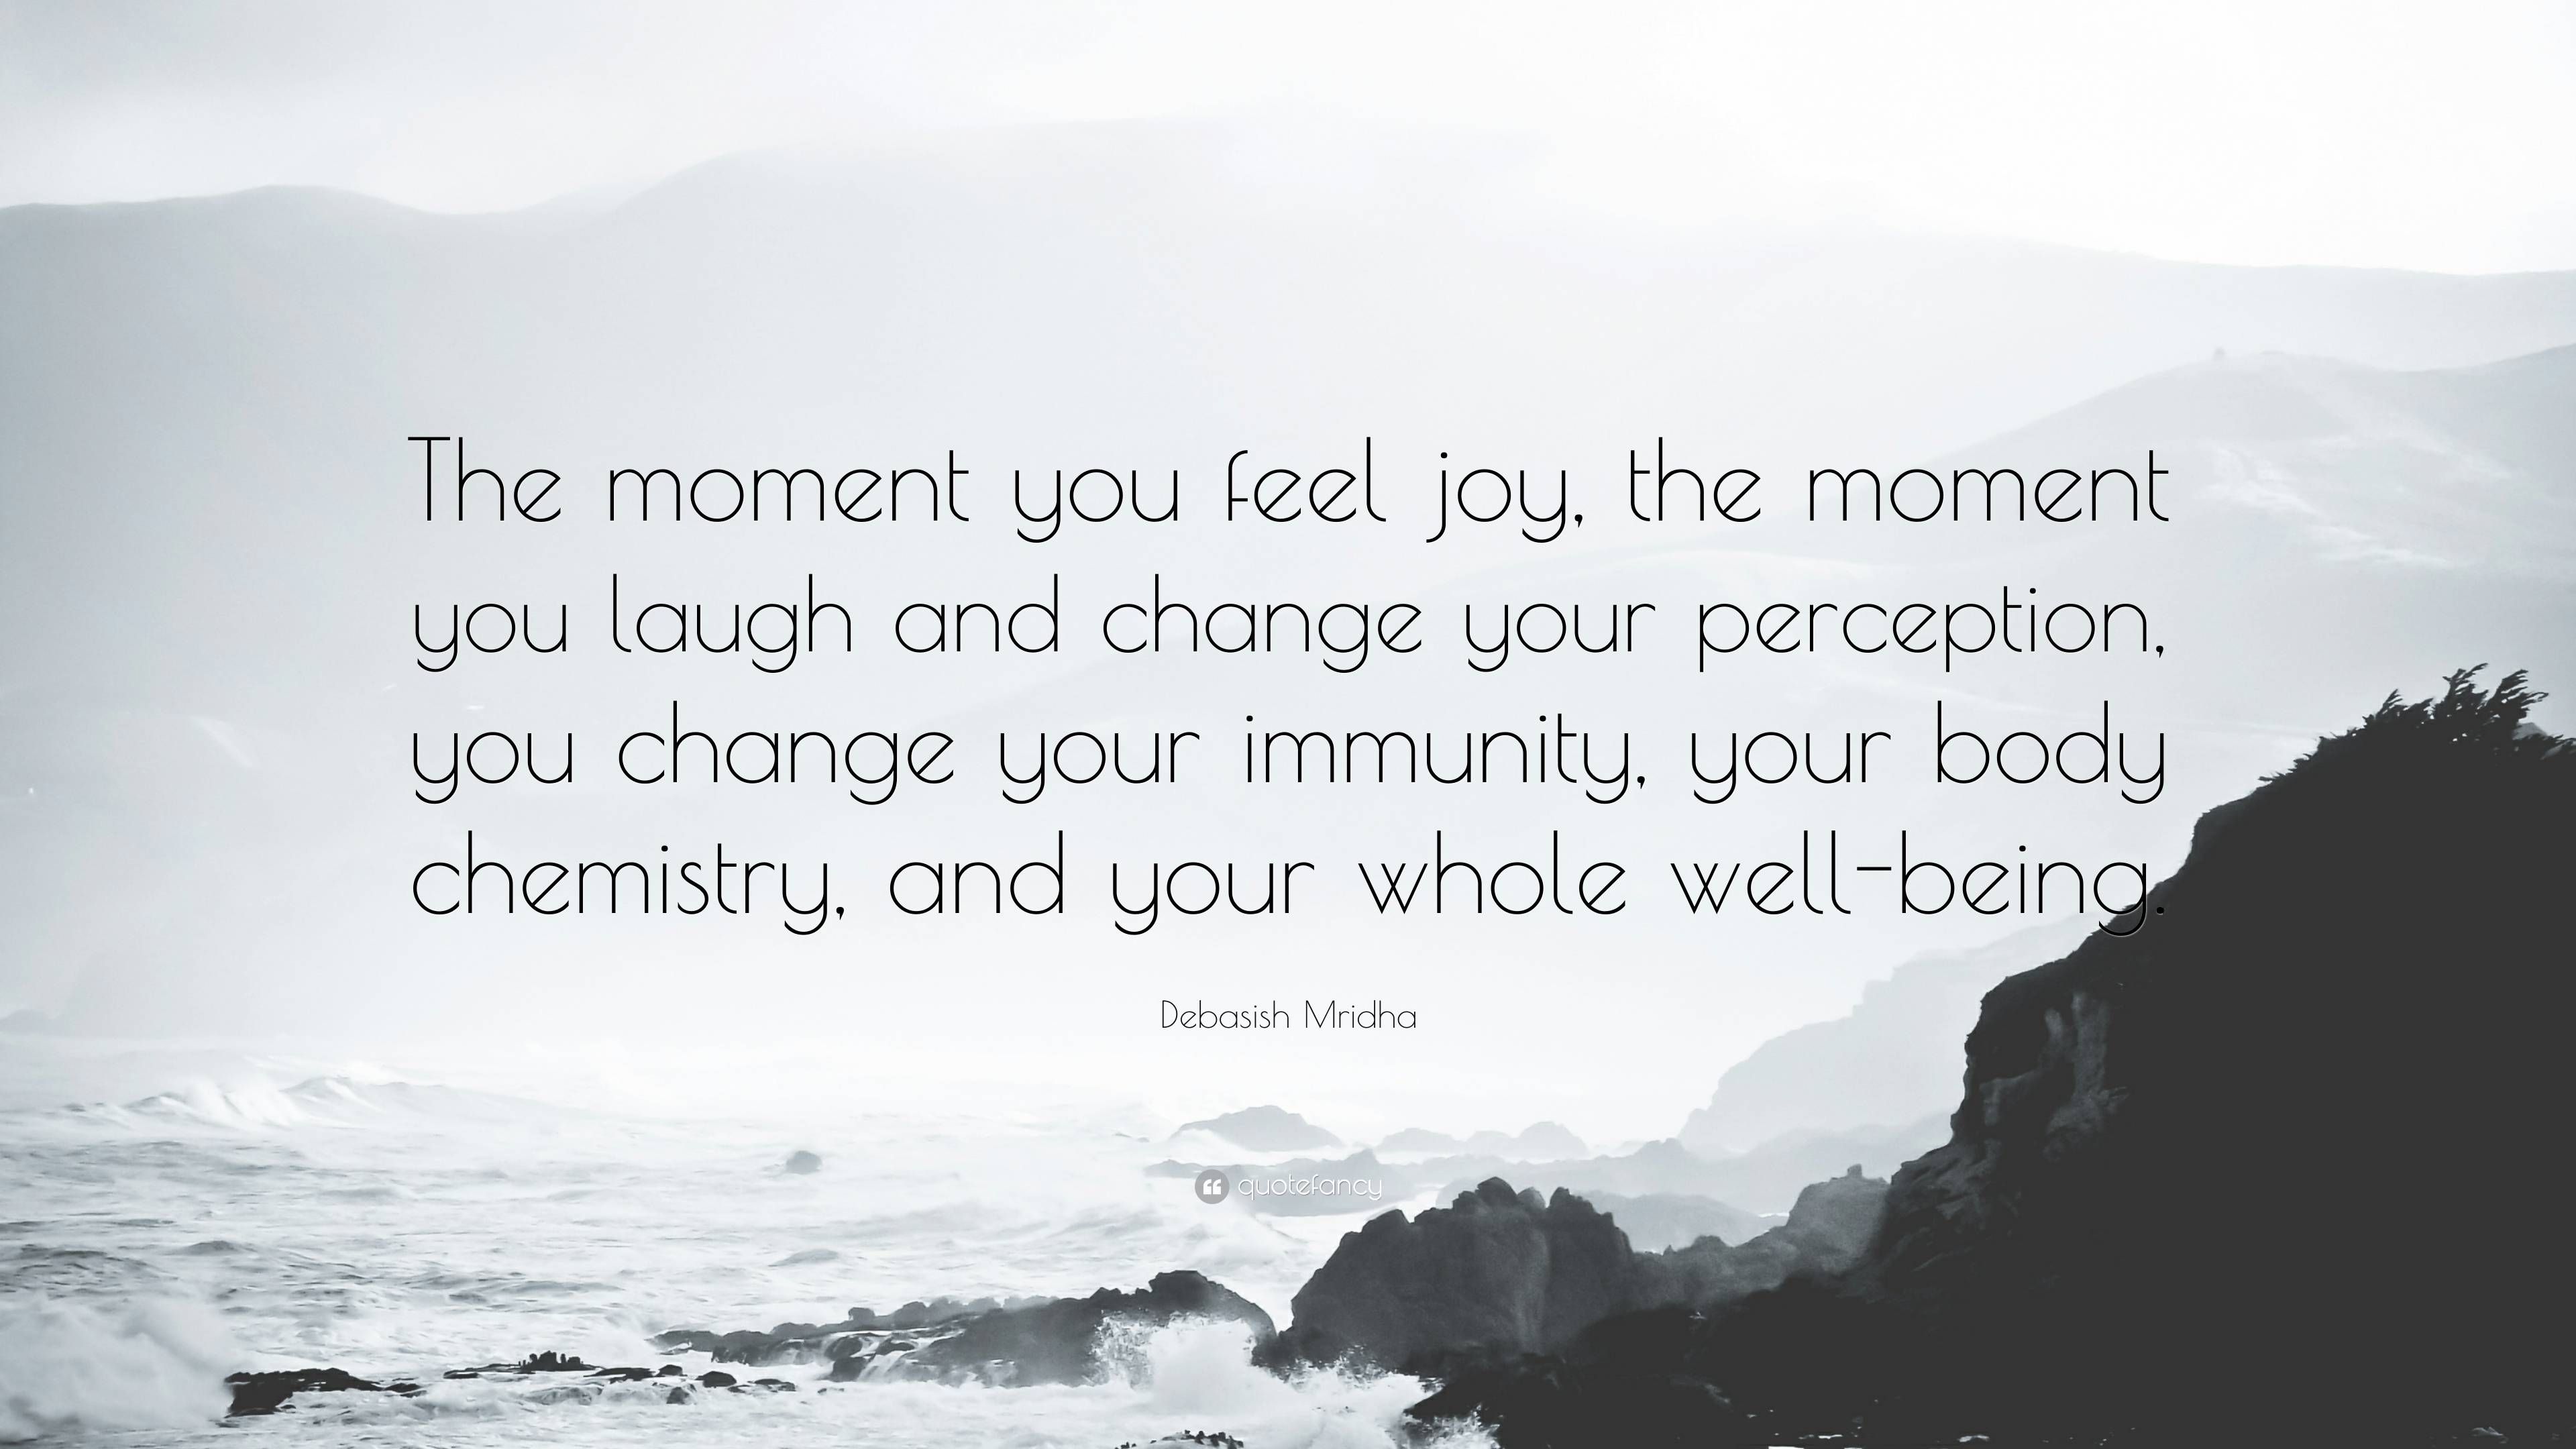 Debasish Mridha Quote: “The moment you feel joy, the moment you laugh ...